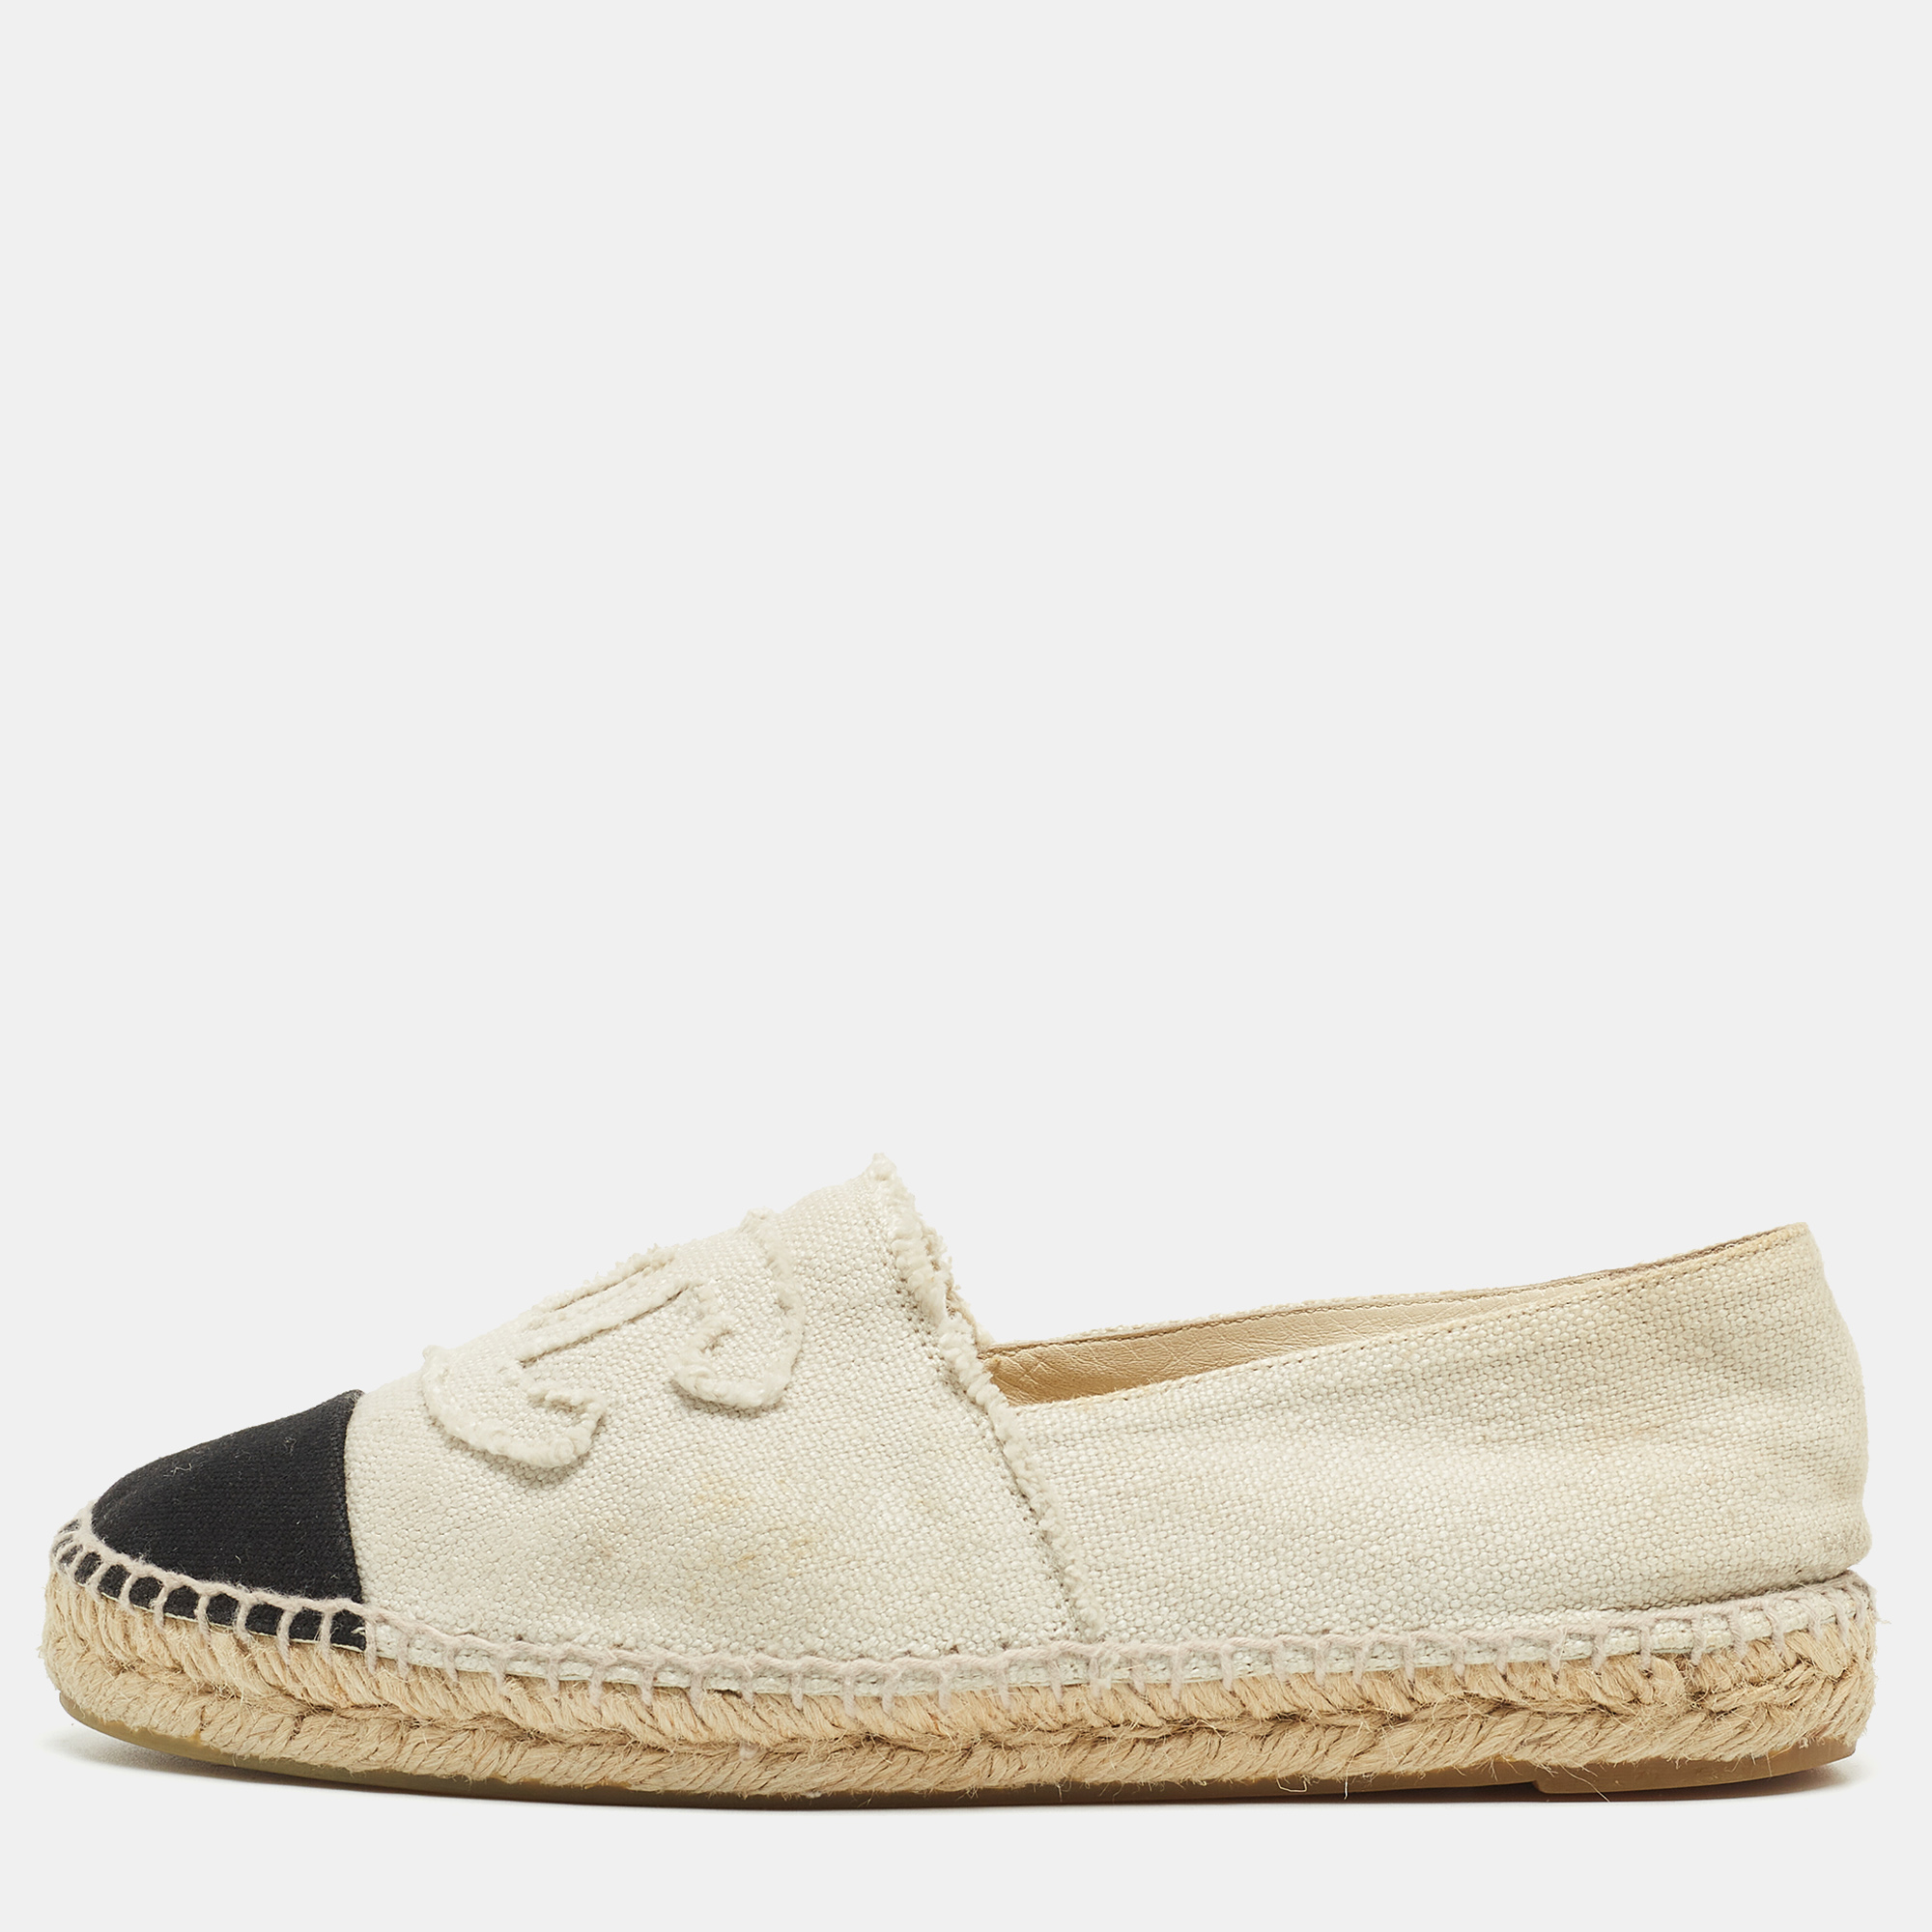 Chanel White/Beige Suede and Canvas CC Low Top Sneakers Size 41 Chanel |  The Luxury Closet